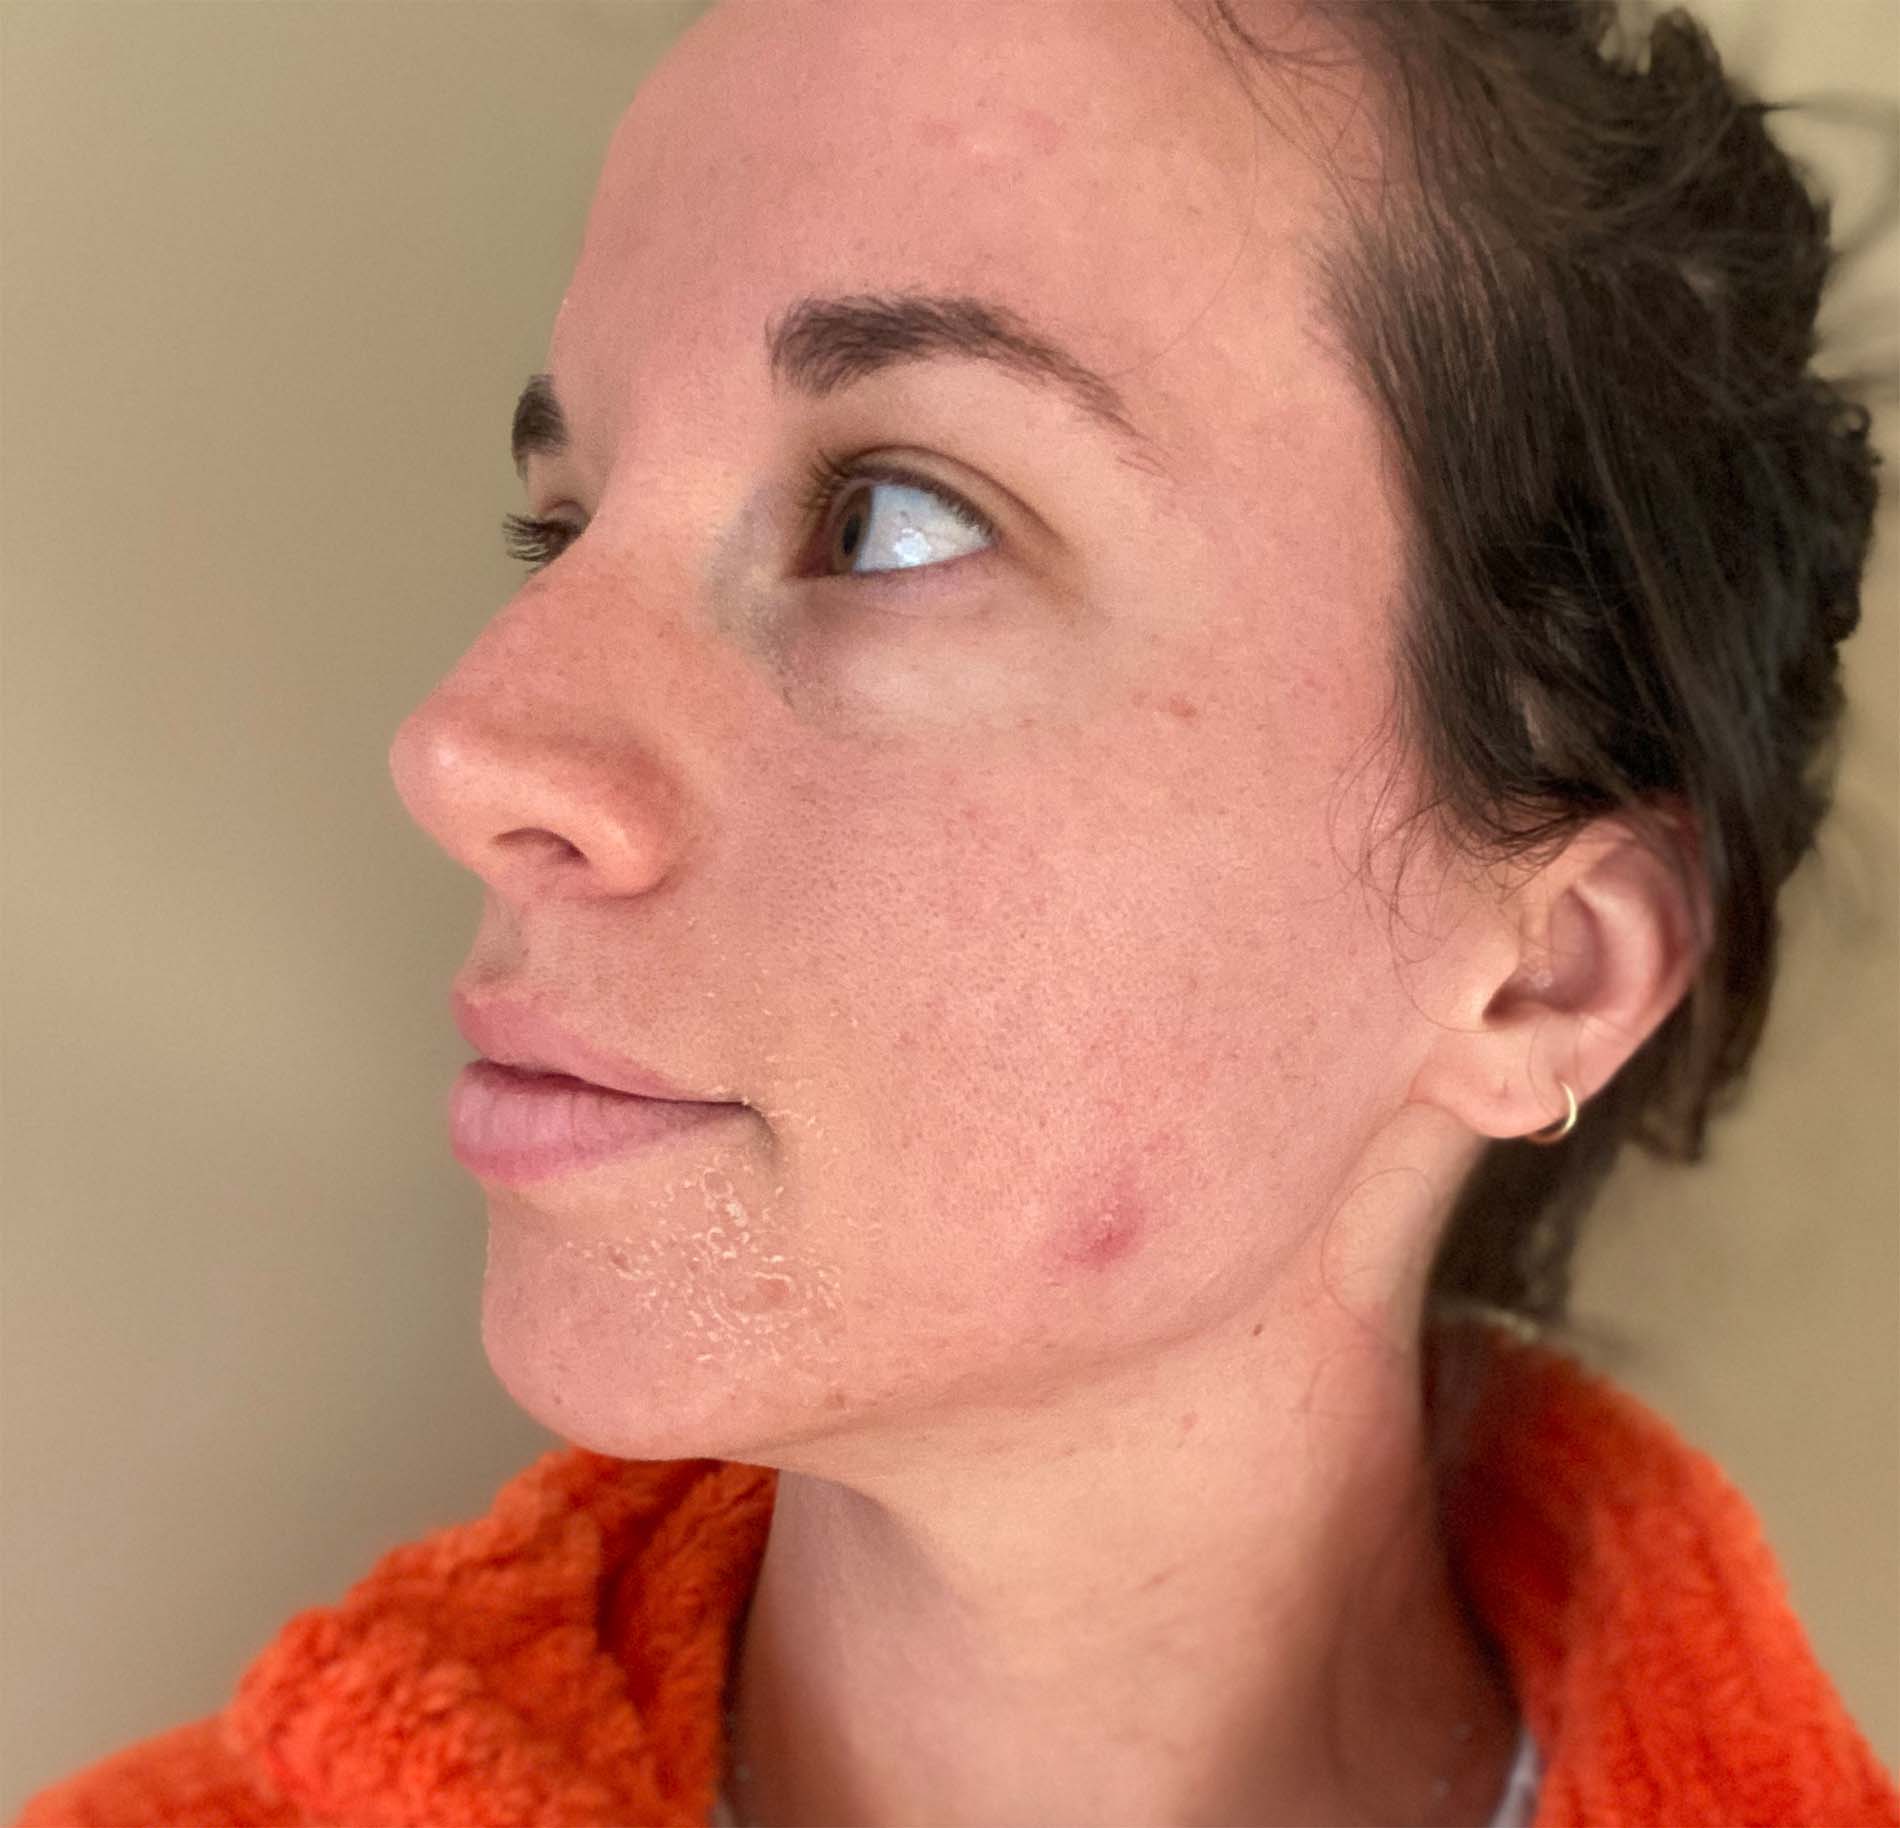 2 Days After Medium-level Chemical Peel showing some mild peeling on the left chin area.